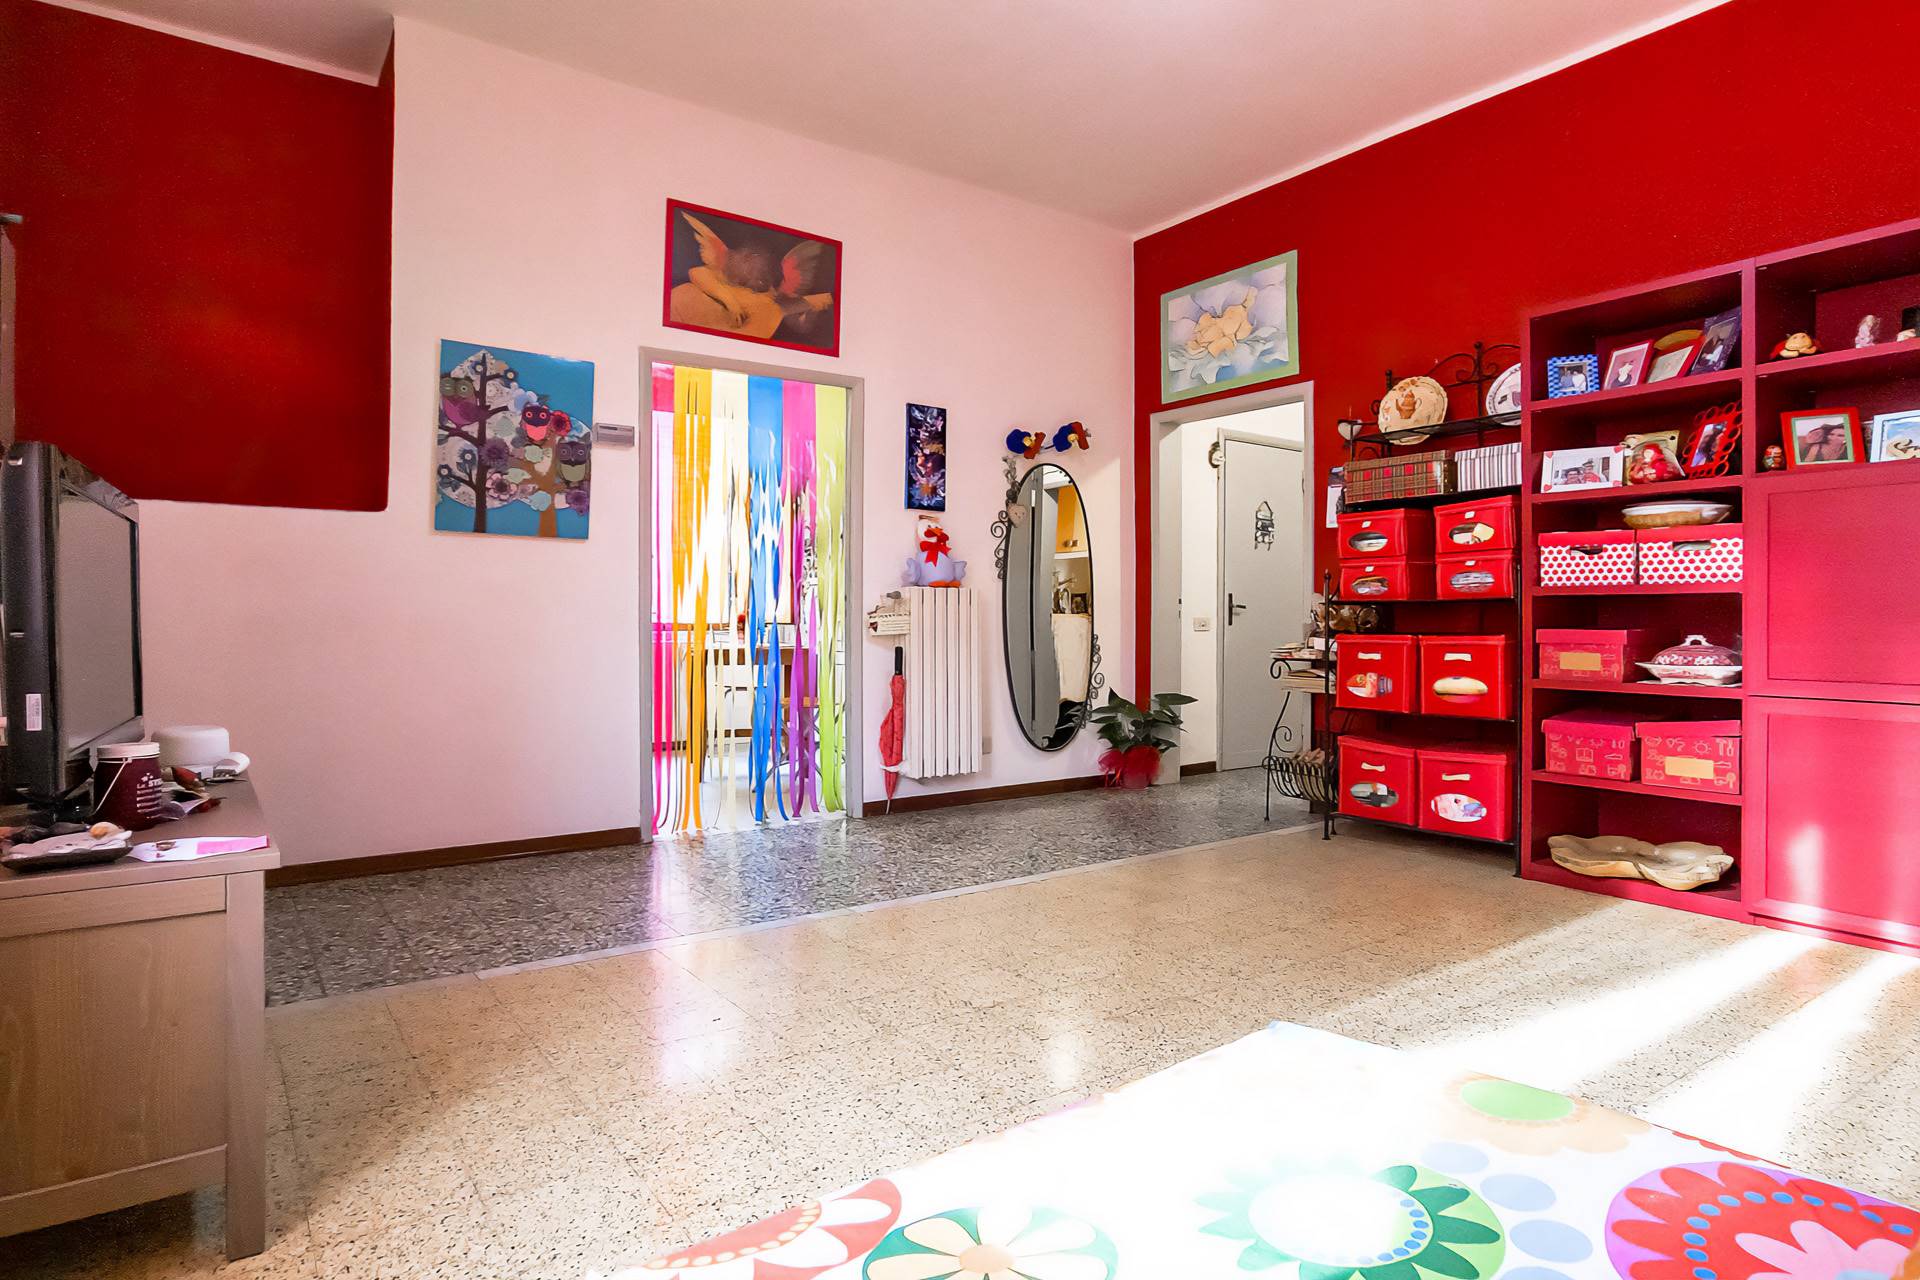 SCACCIAPENSIERI, SIENA, Apartment for sale of 77 Sq. mt., Habitable, Heating Individual heating system, Energetic class: G, Epi: 175 kwh/m2 year, 